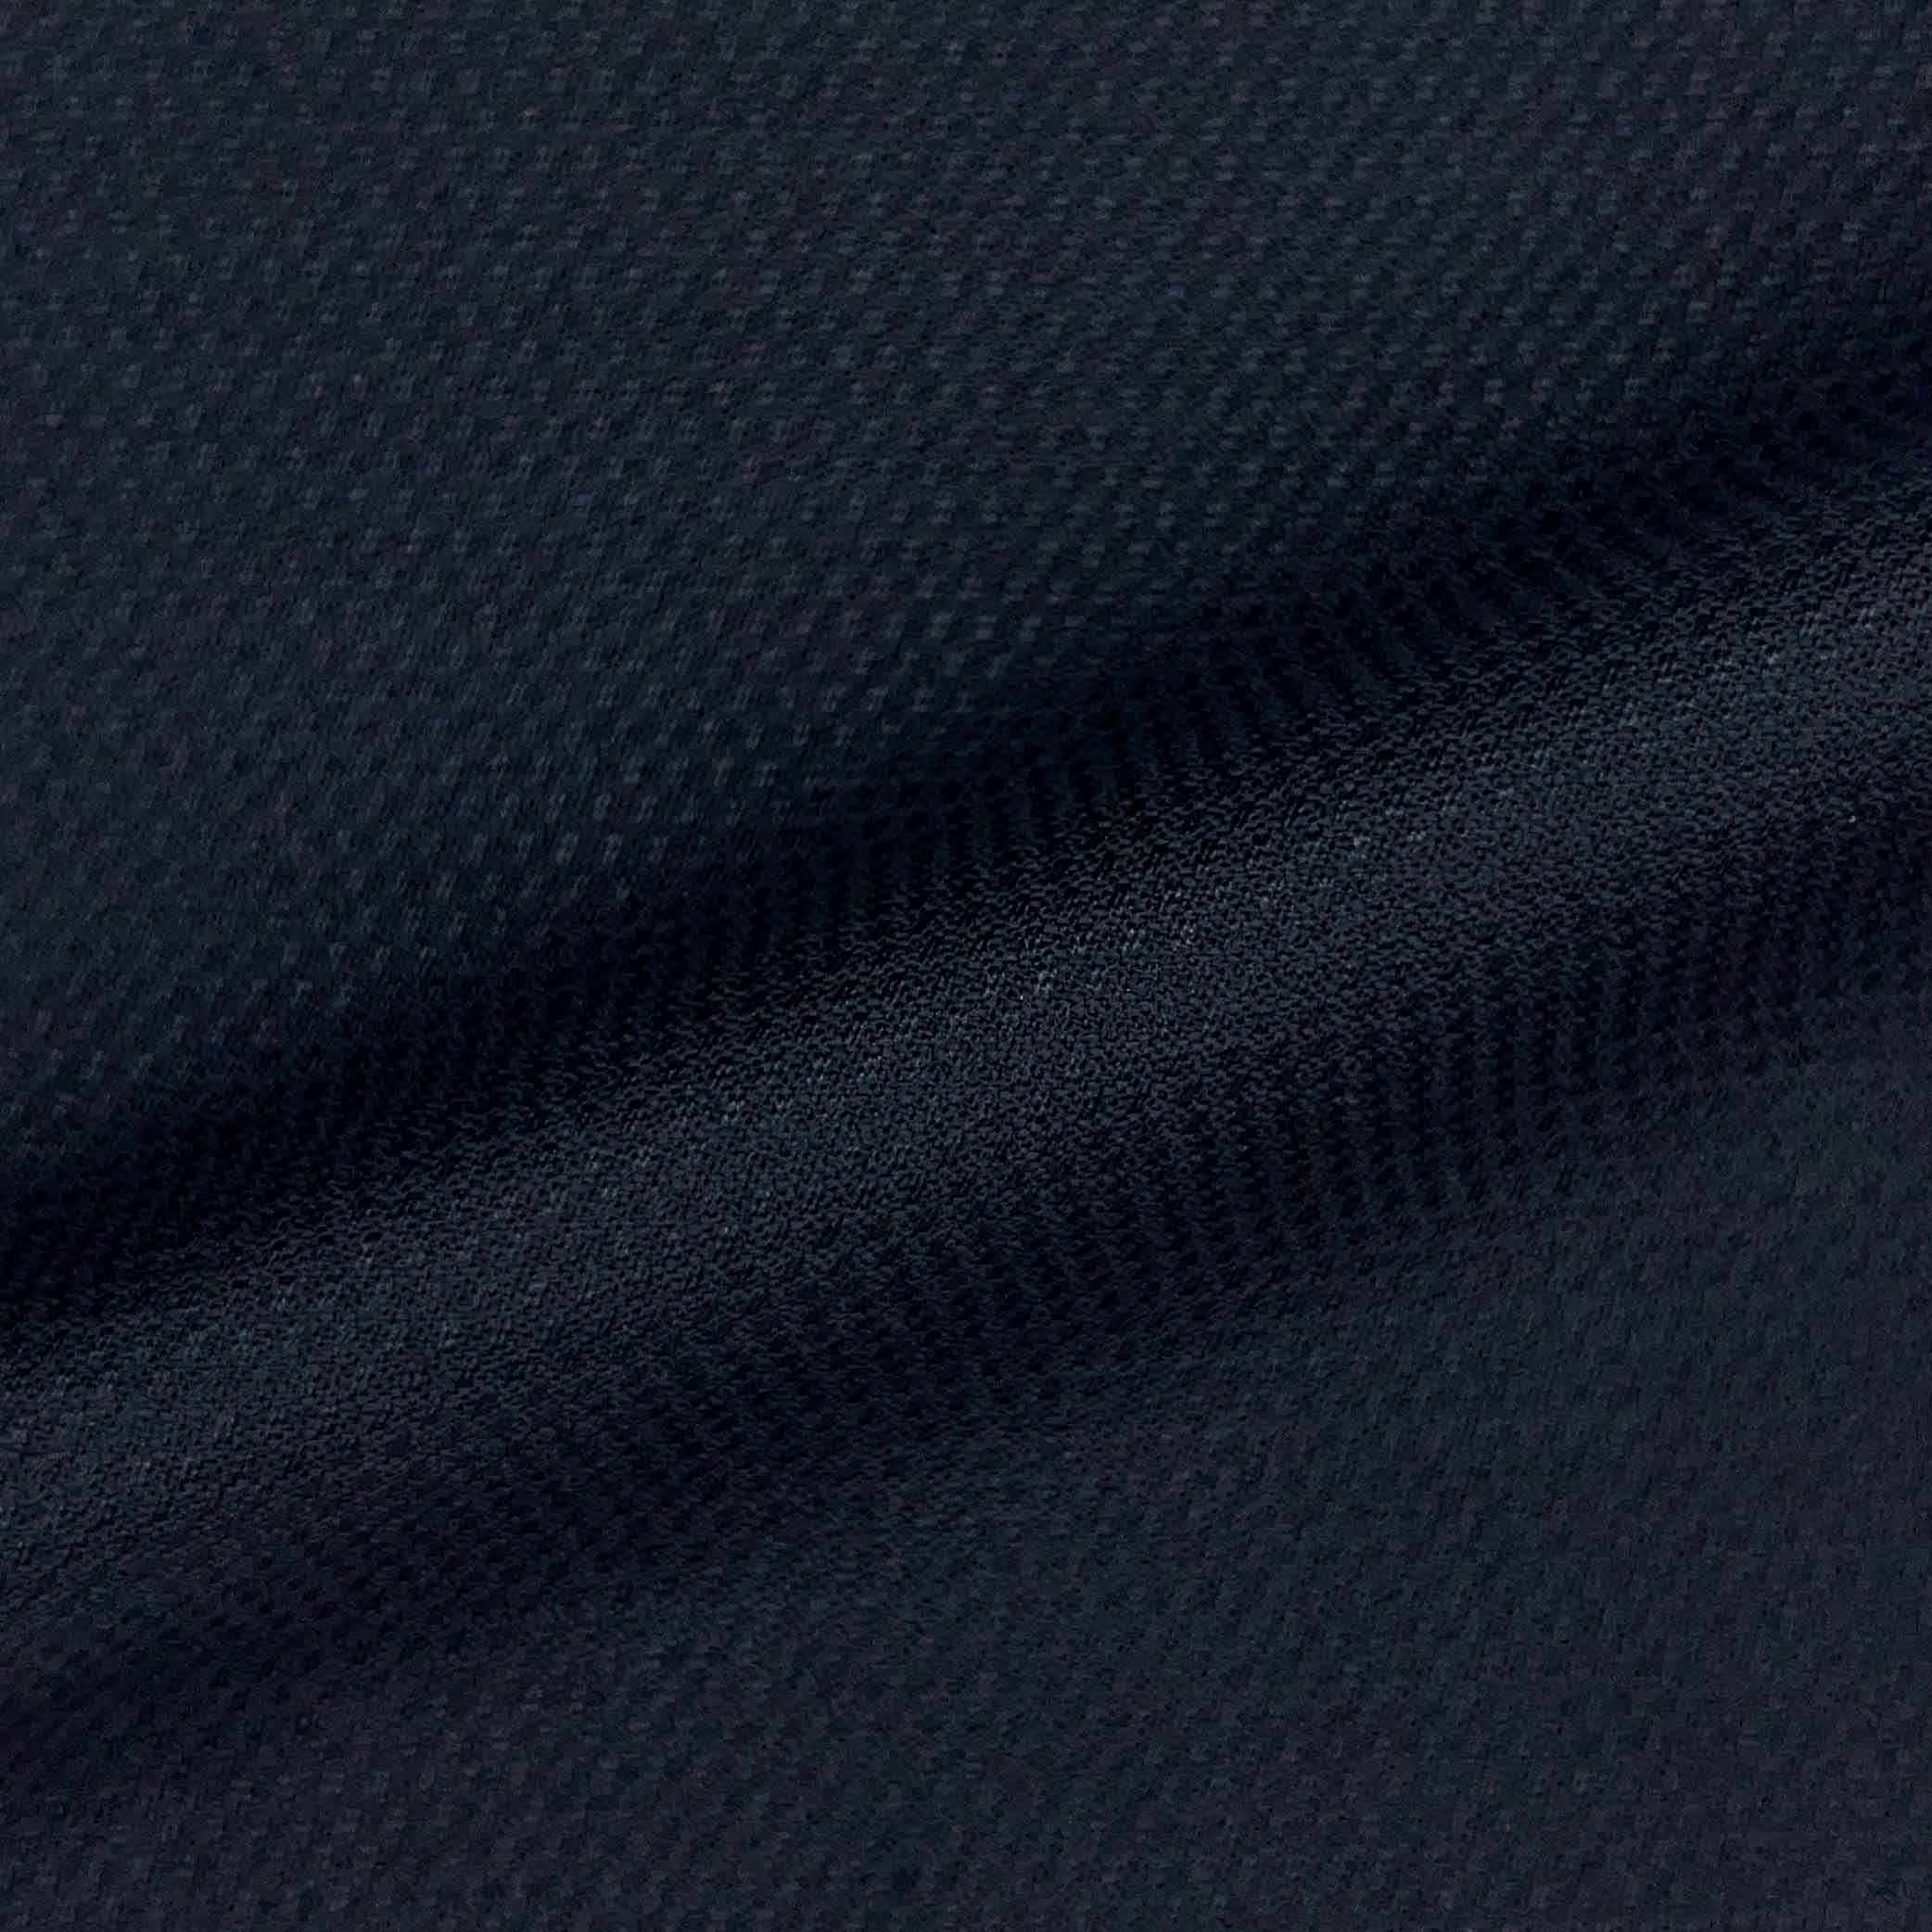 Westwood Hart Online Custom Hand Tailor Suits Sportcoats Trousers Waistcoats Overcoats Made To Measure Formalwear Tuxedo Midnight Blue Birdseye With Comfort Stretch